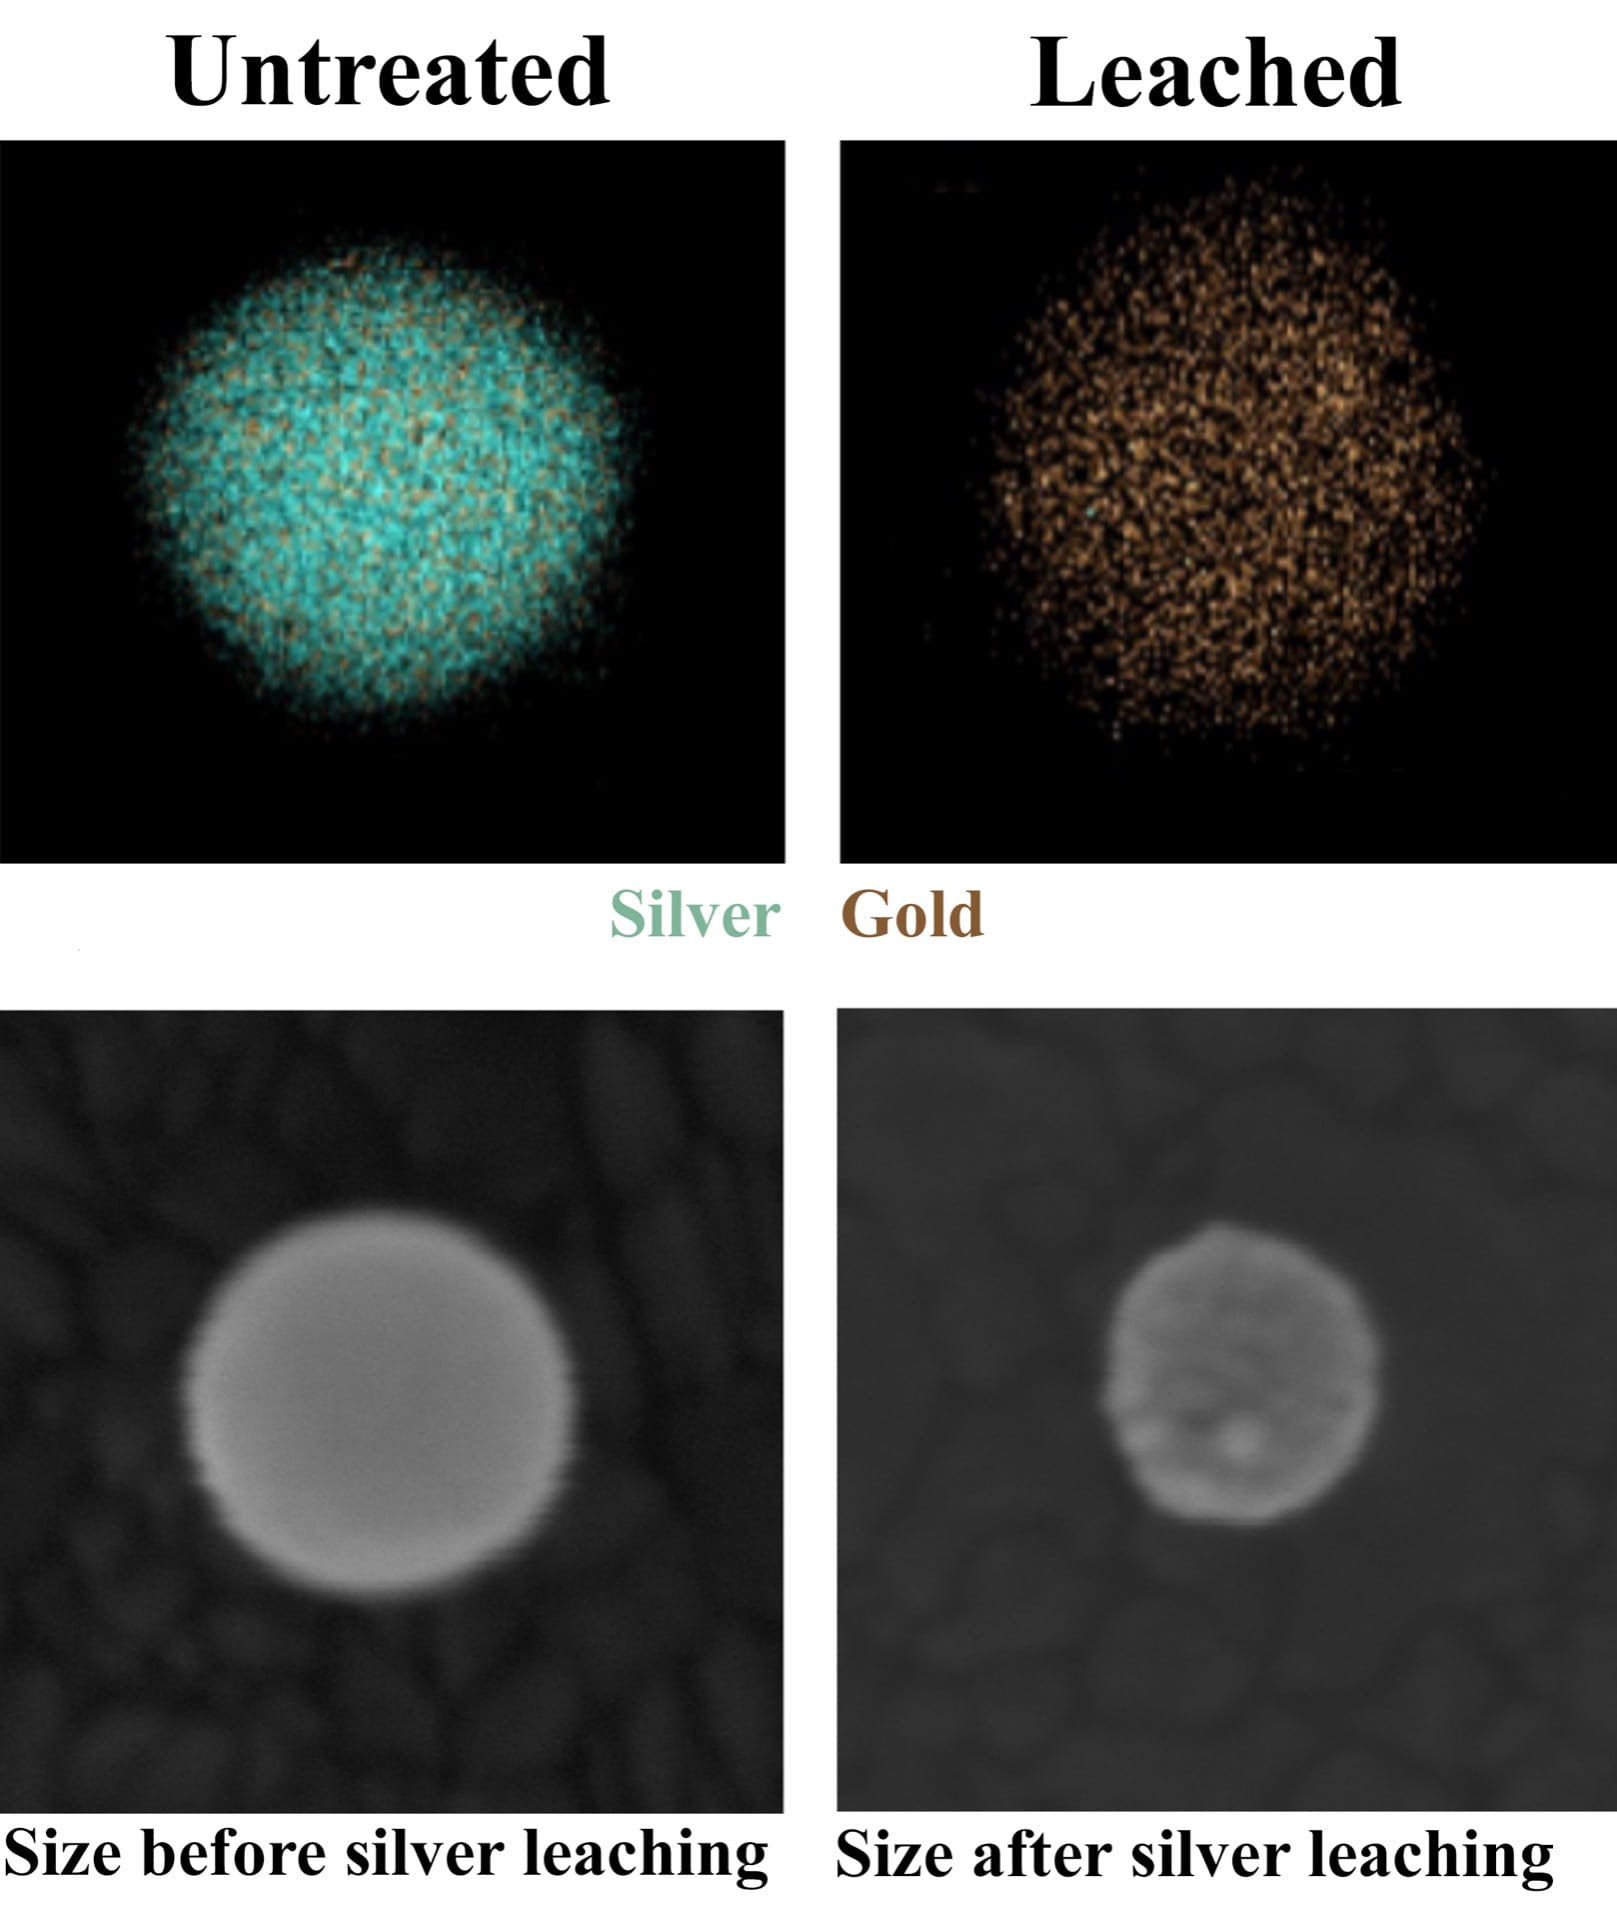 Chemists at Rice University and the University of Duisburg-Essen, Germany quantified the release of silver ions from gold-silver nanoparticle alloys. At top, transmission electron microscope images show the change in color as silver (in blue) leaches out of a nanoparticle over several hours, leaving gold atoms behind. The bottom hyperspectral images show how much a nanoparticle of silver and gold shrank over four hours as the silver leaches away. (Credit: Rice University)